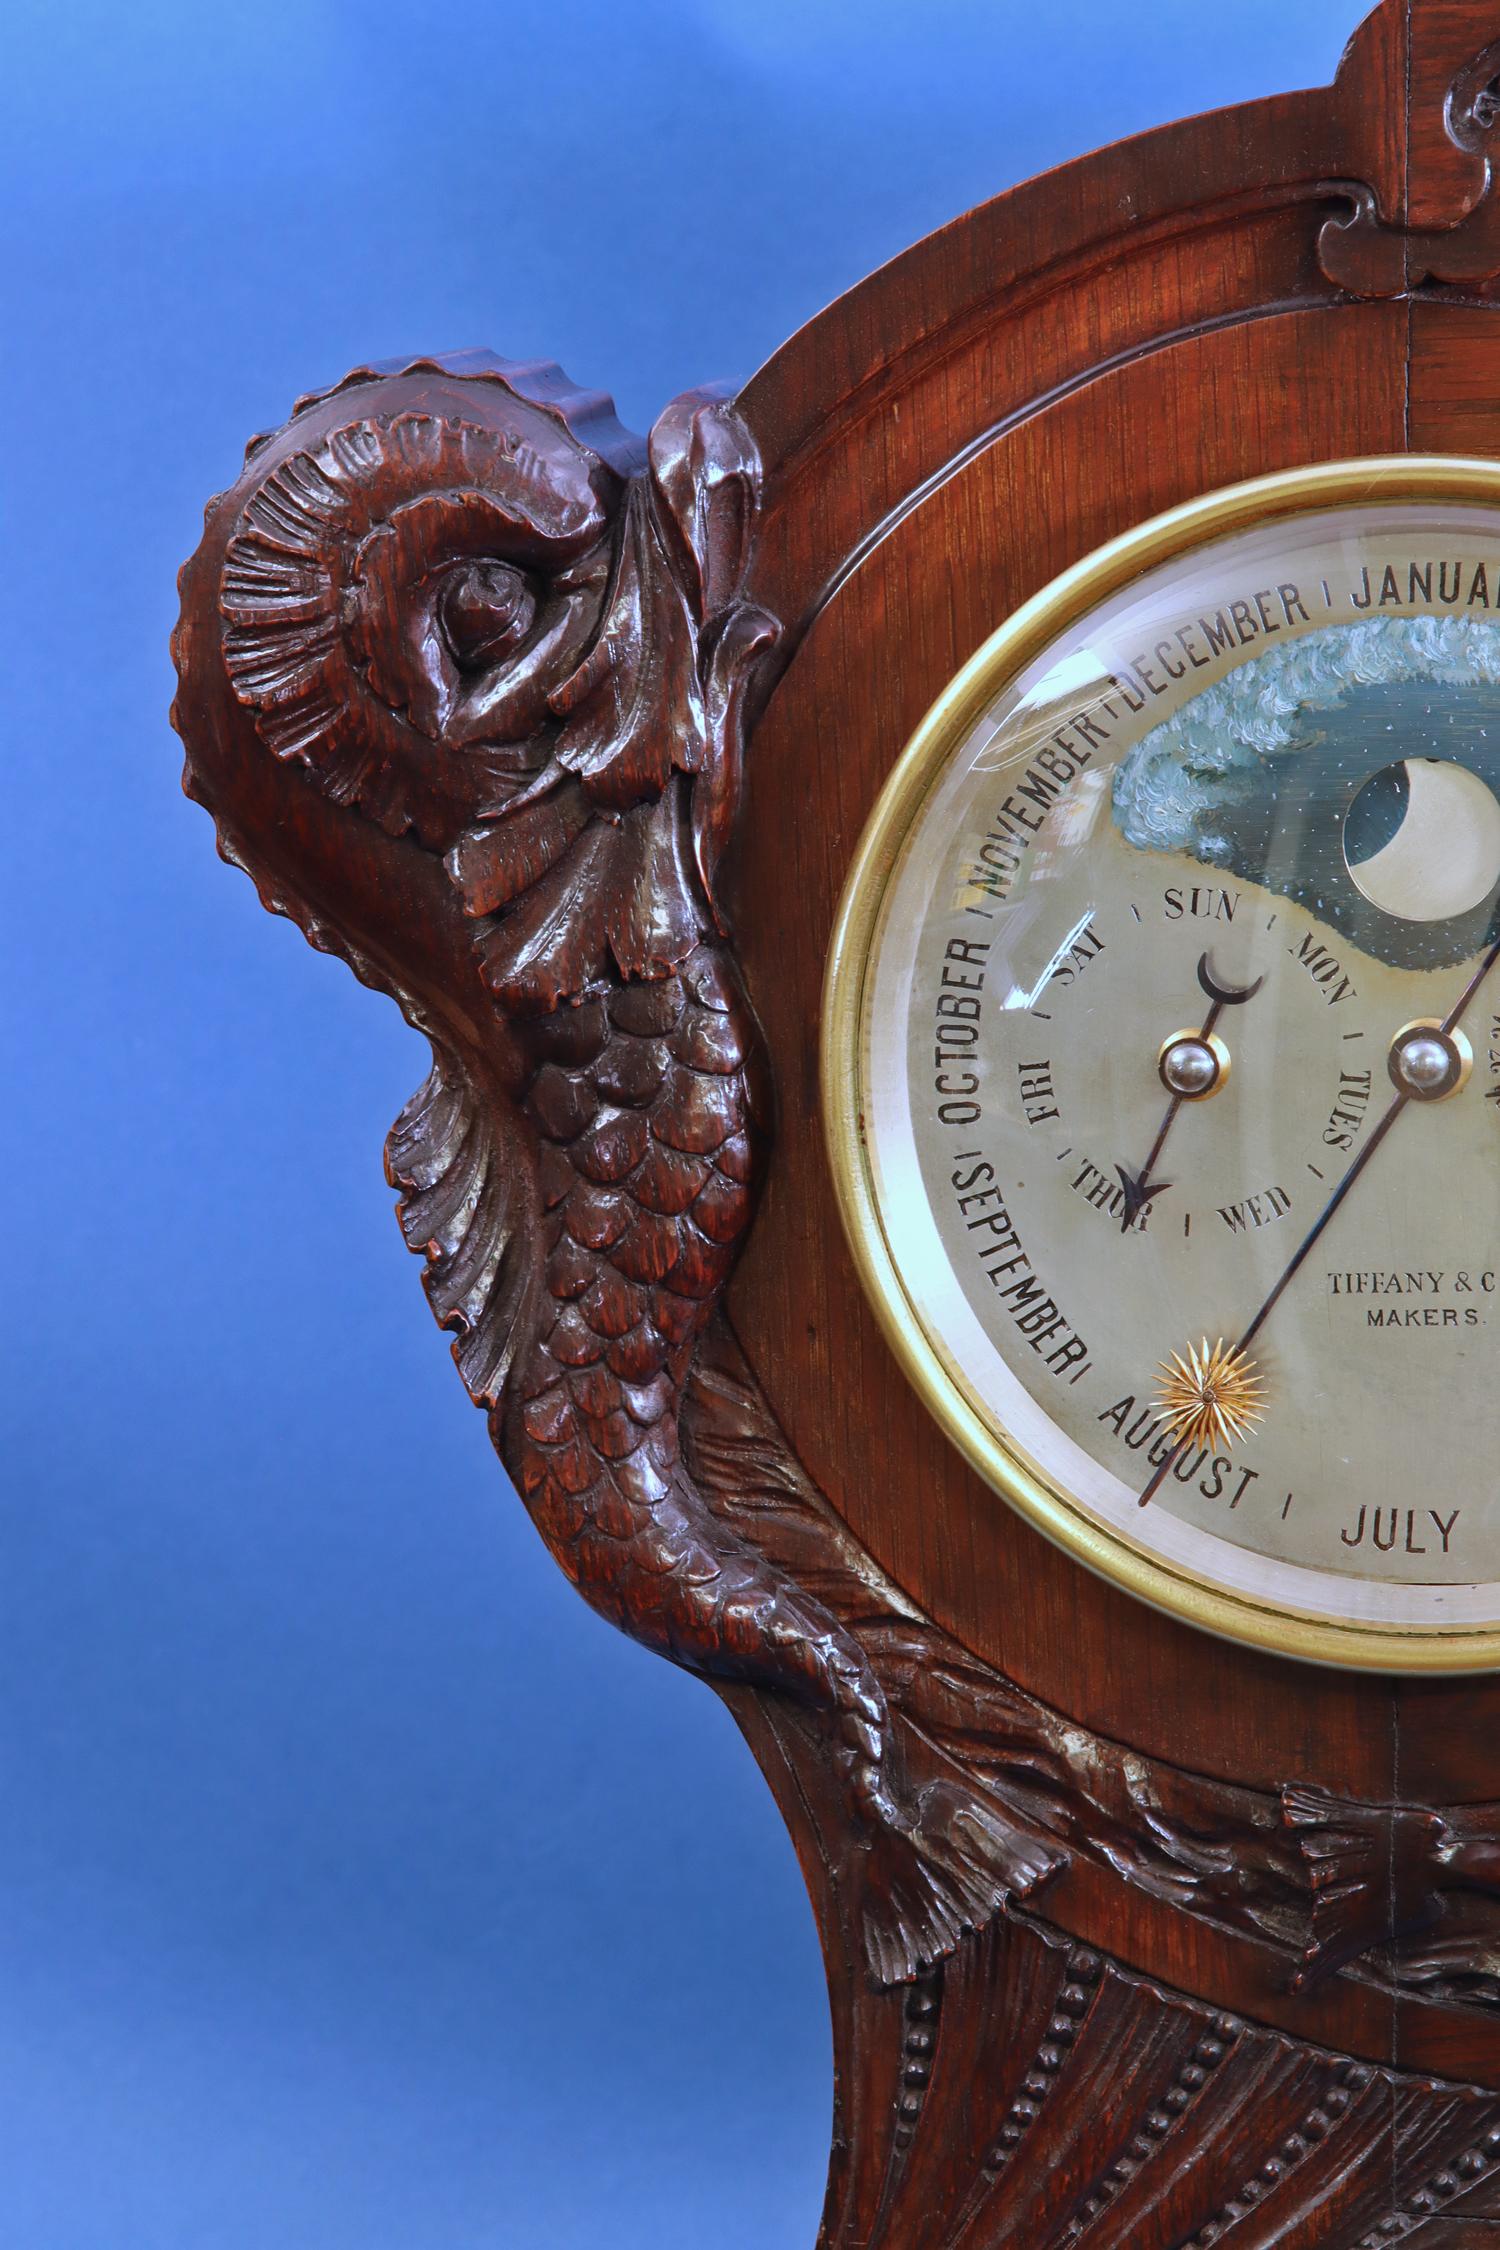 Wood c.1910 Rare Double Dial Clock with Perpetual Calendar by Tiffany & Co., Makers.